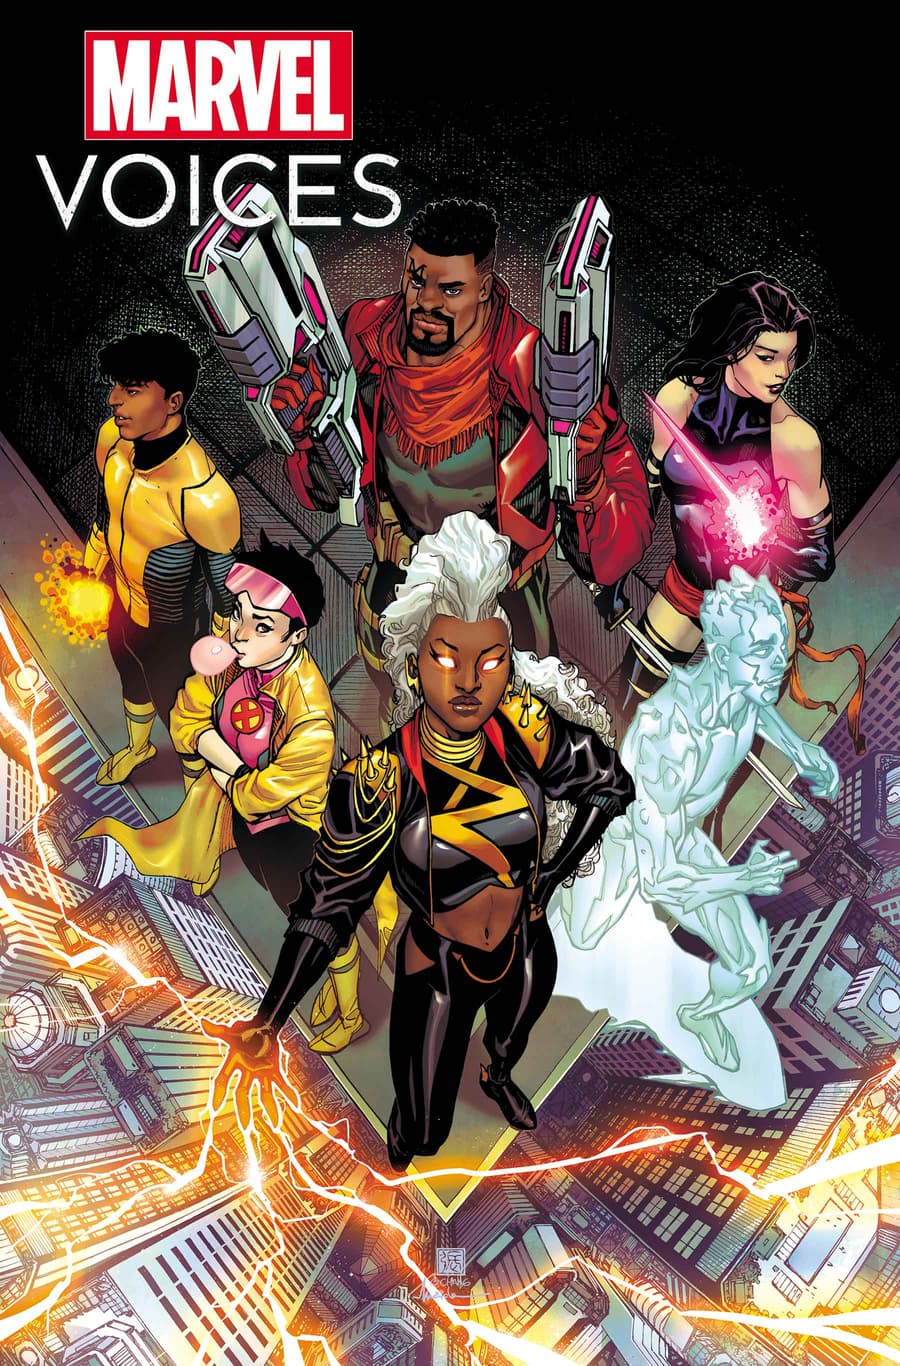 MARVEL'S VOICES: X-MEN #1 cover by Bernard Chang